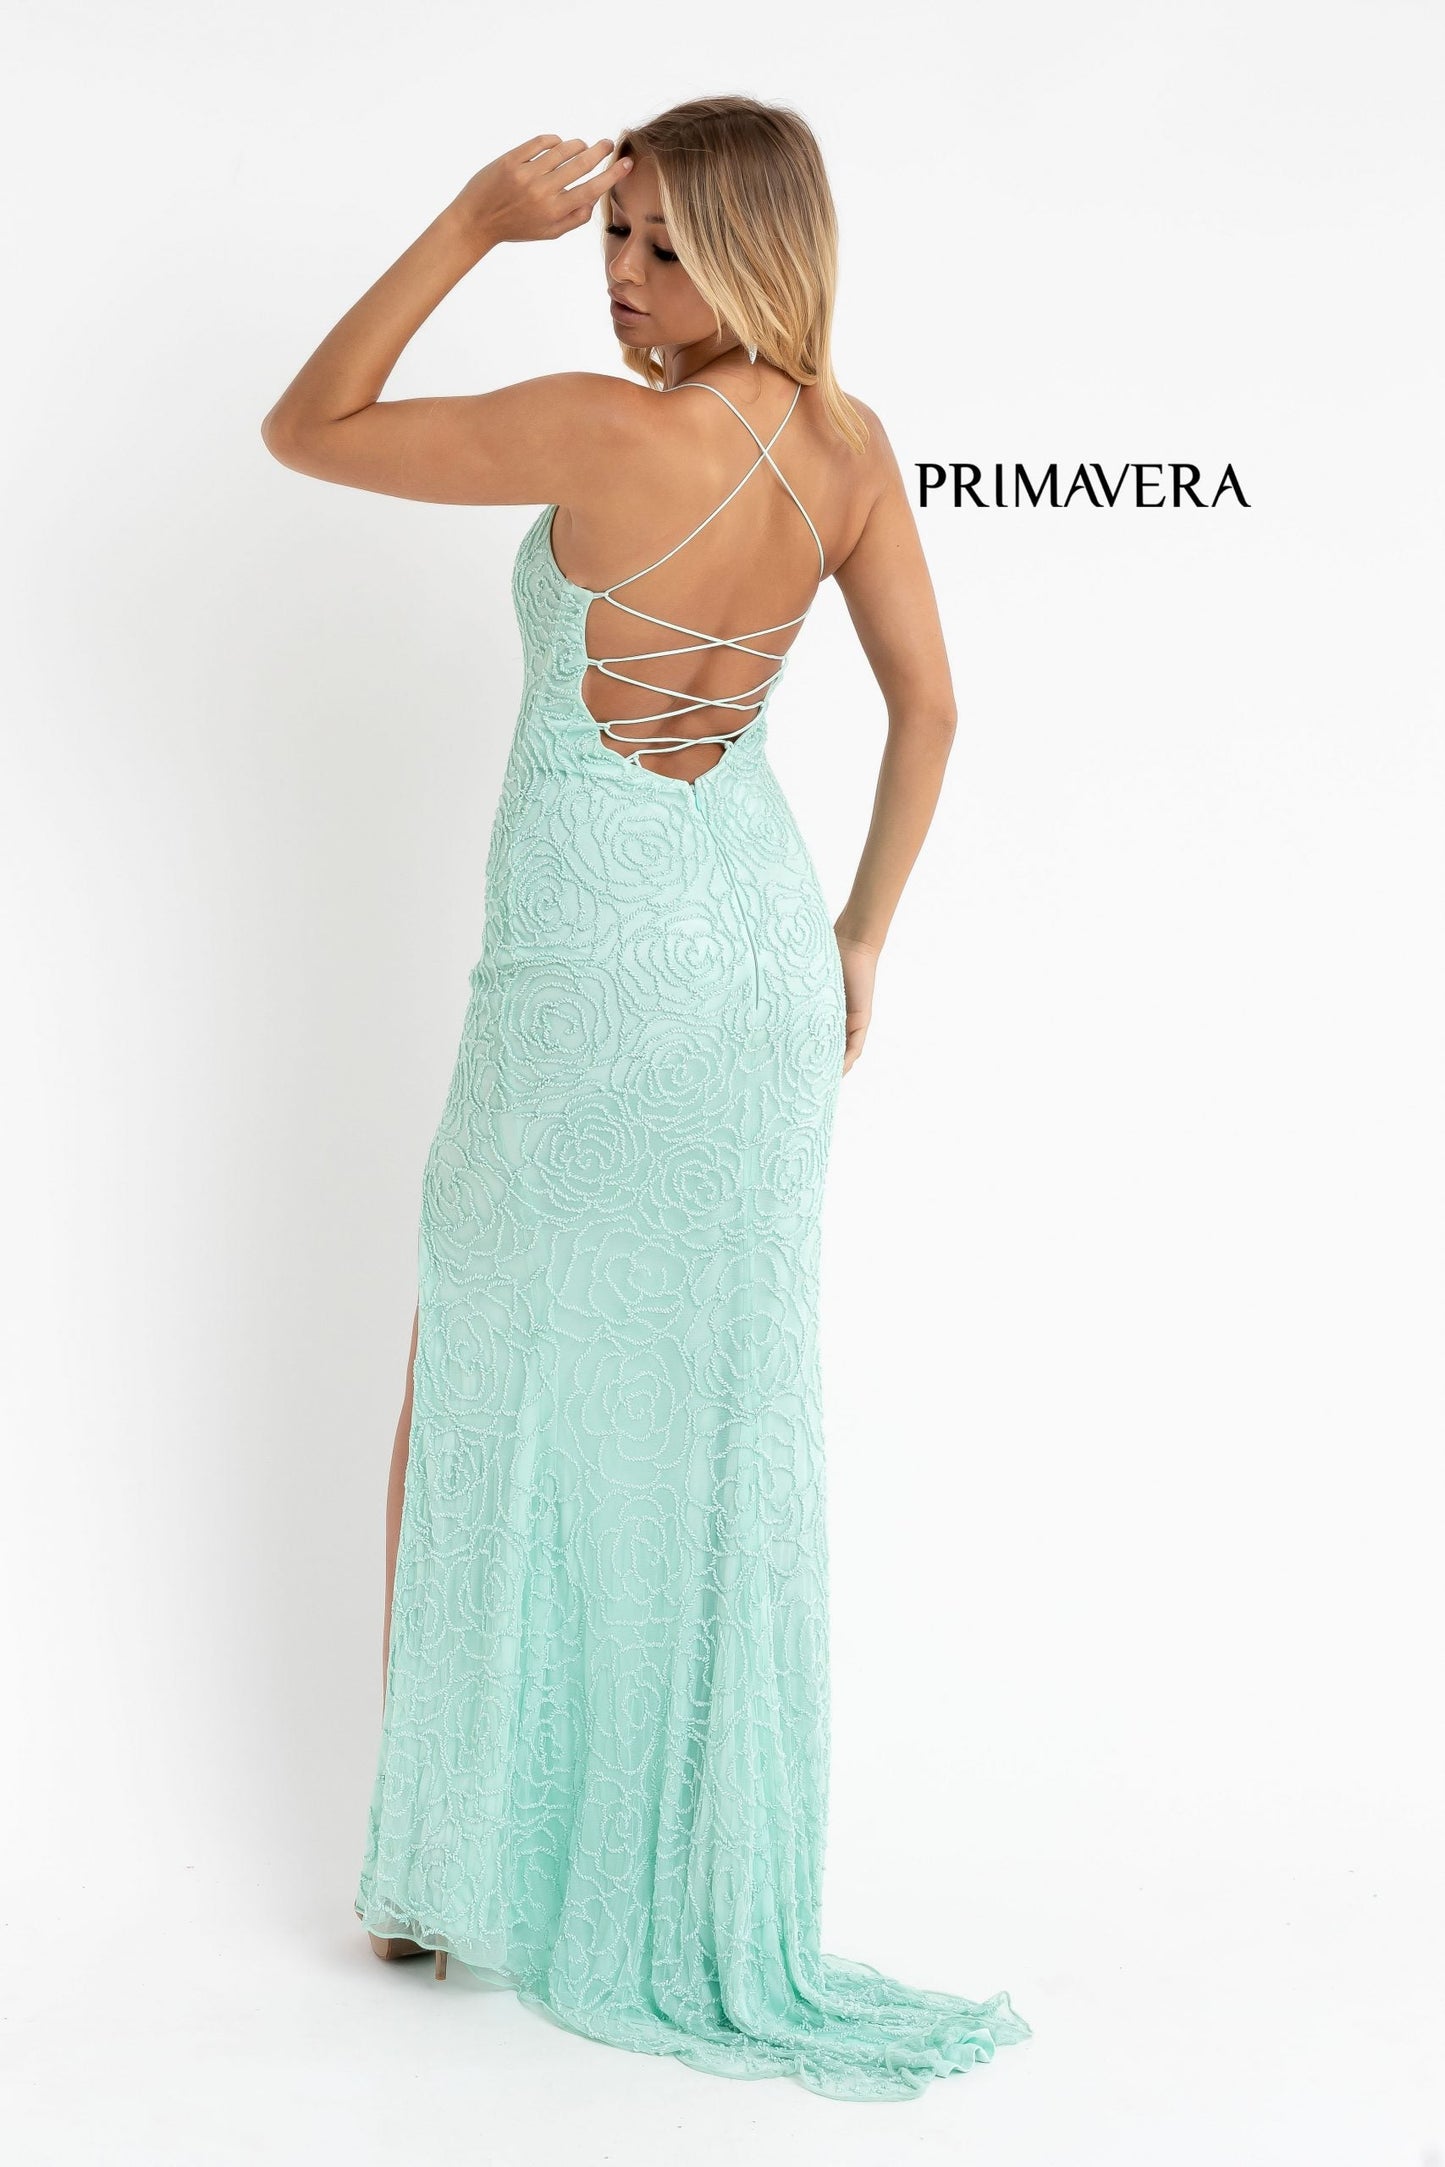 Primavera Couture 3638 Size 2 Bright Blue Long Fitted Floral Beaded Prom Dress Backless Formal Corset